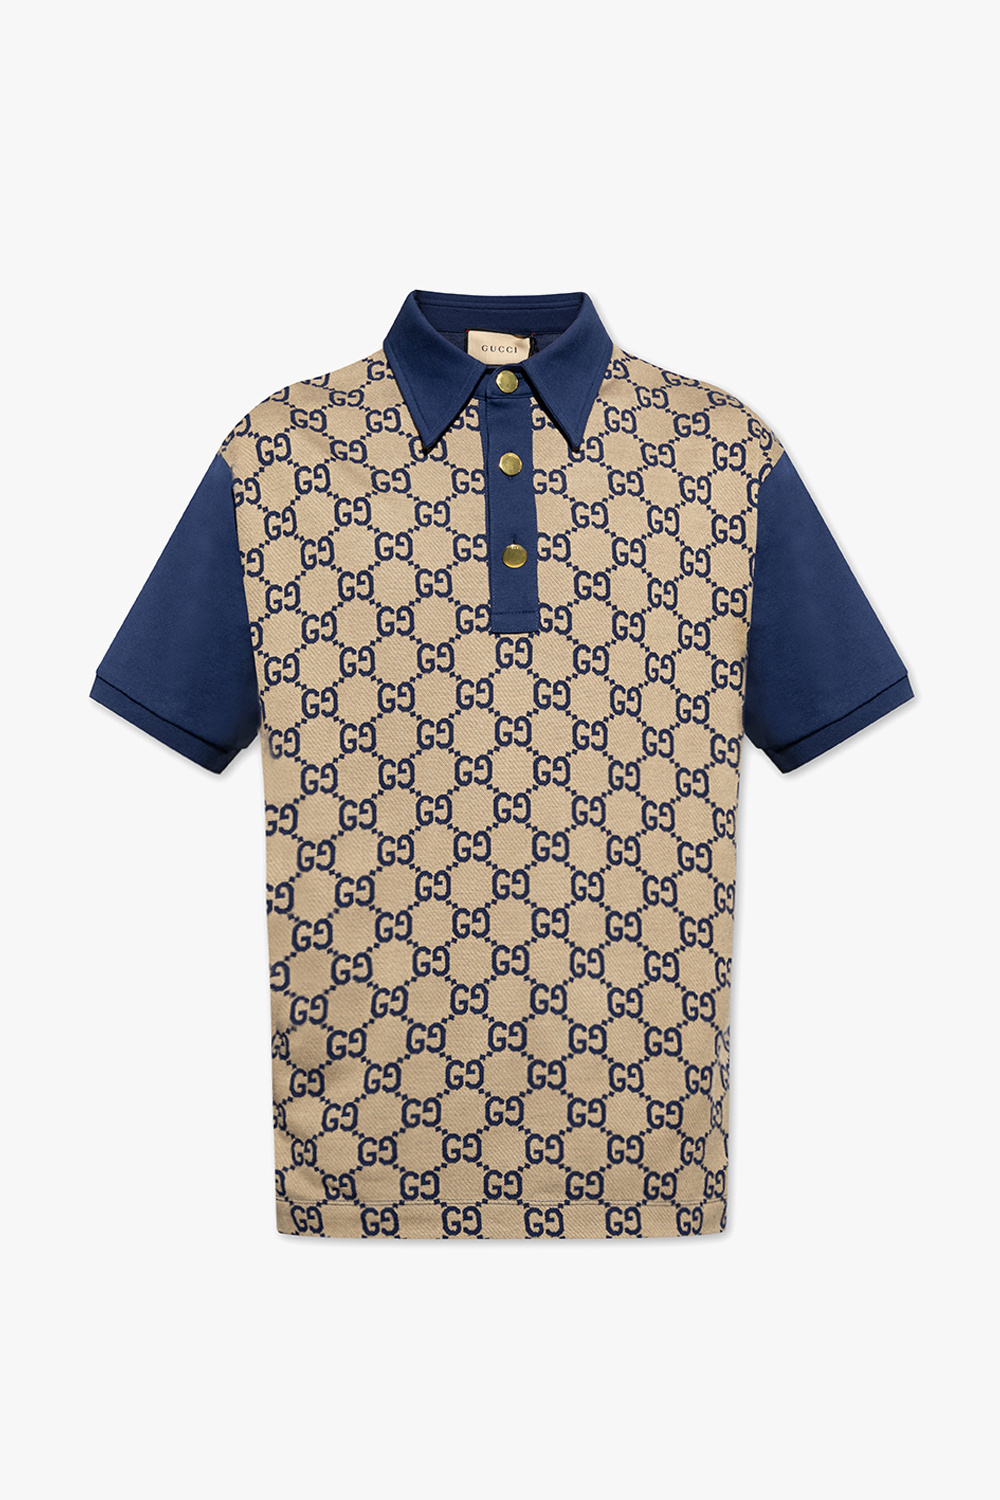 ▷ Gucci Monogram Polo Shirt, Made in Italy